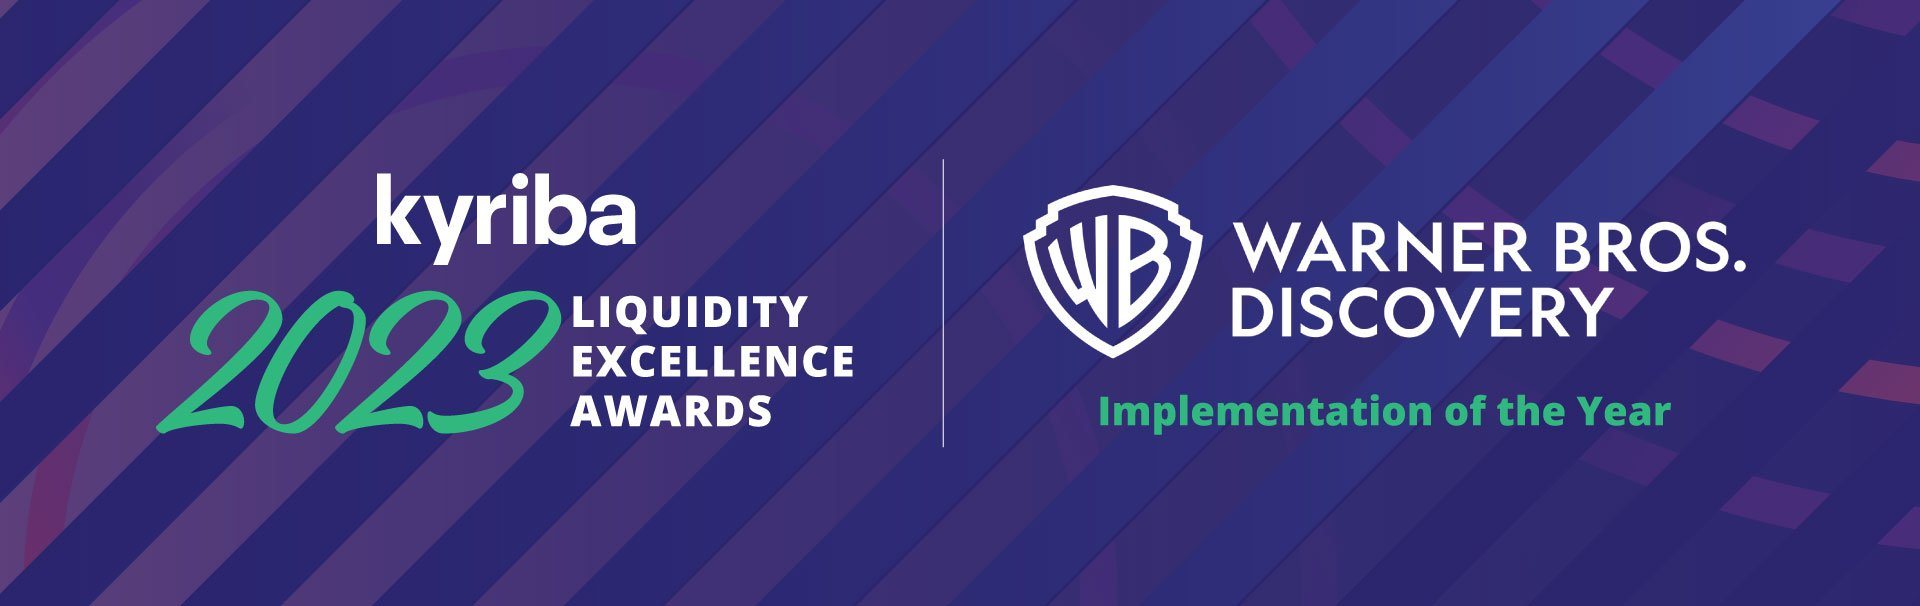 Warner Bros. Discovery:TMS Implementation of the Year Award Winner